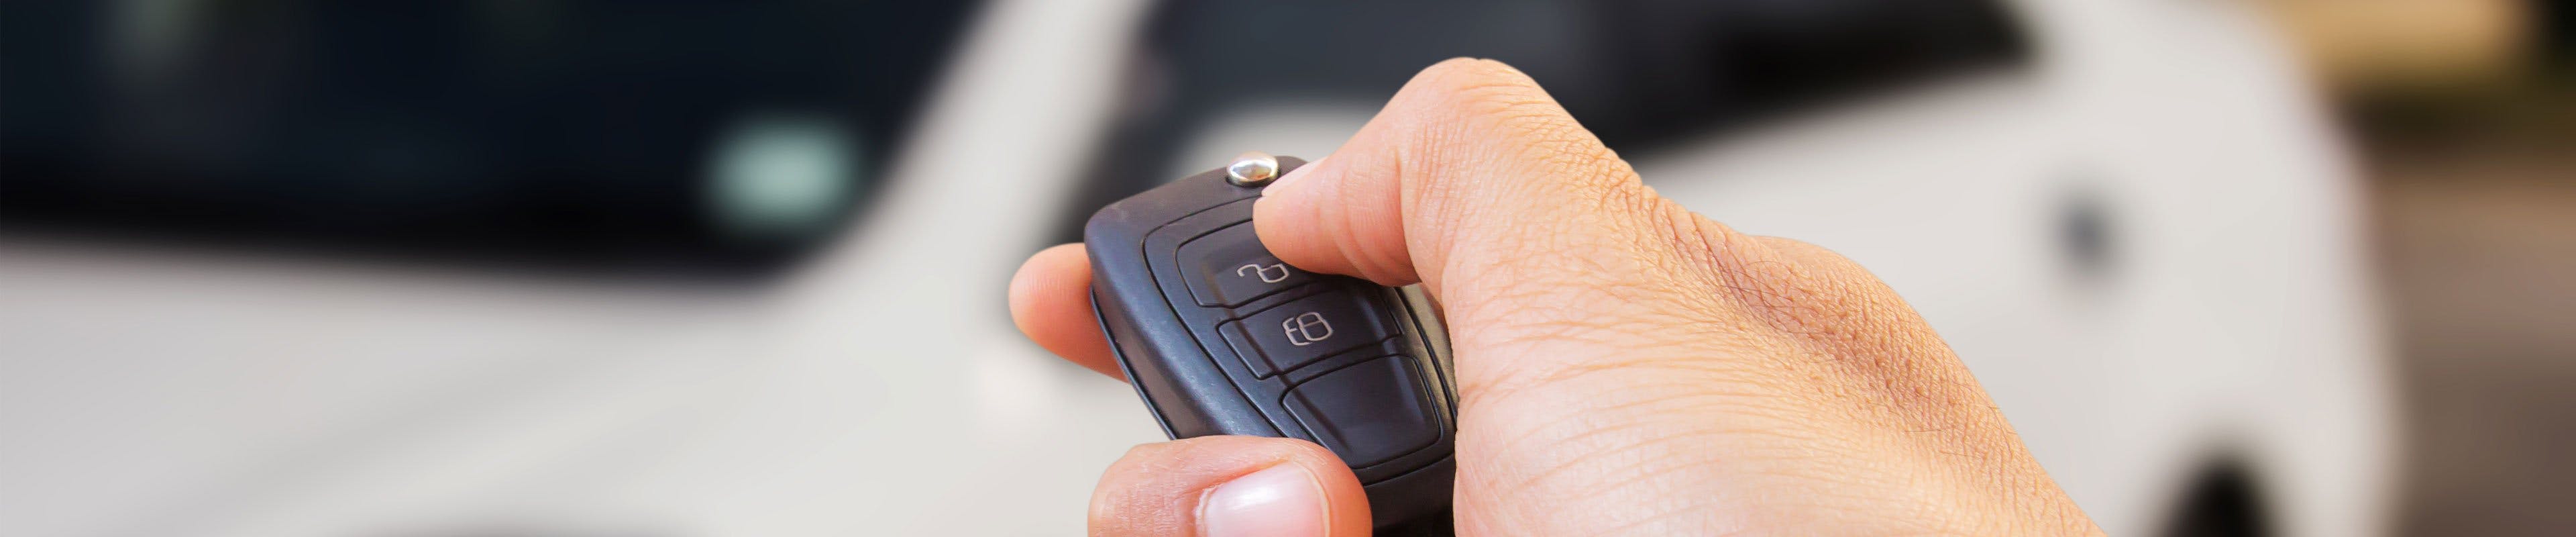 Using remote key to open car